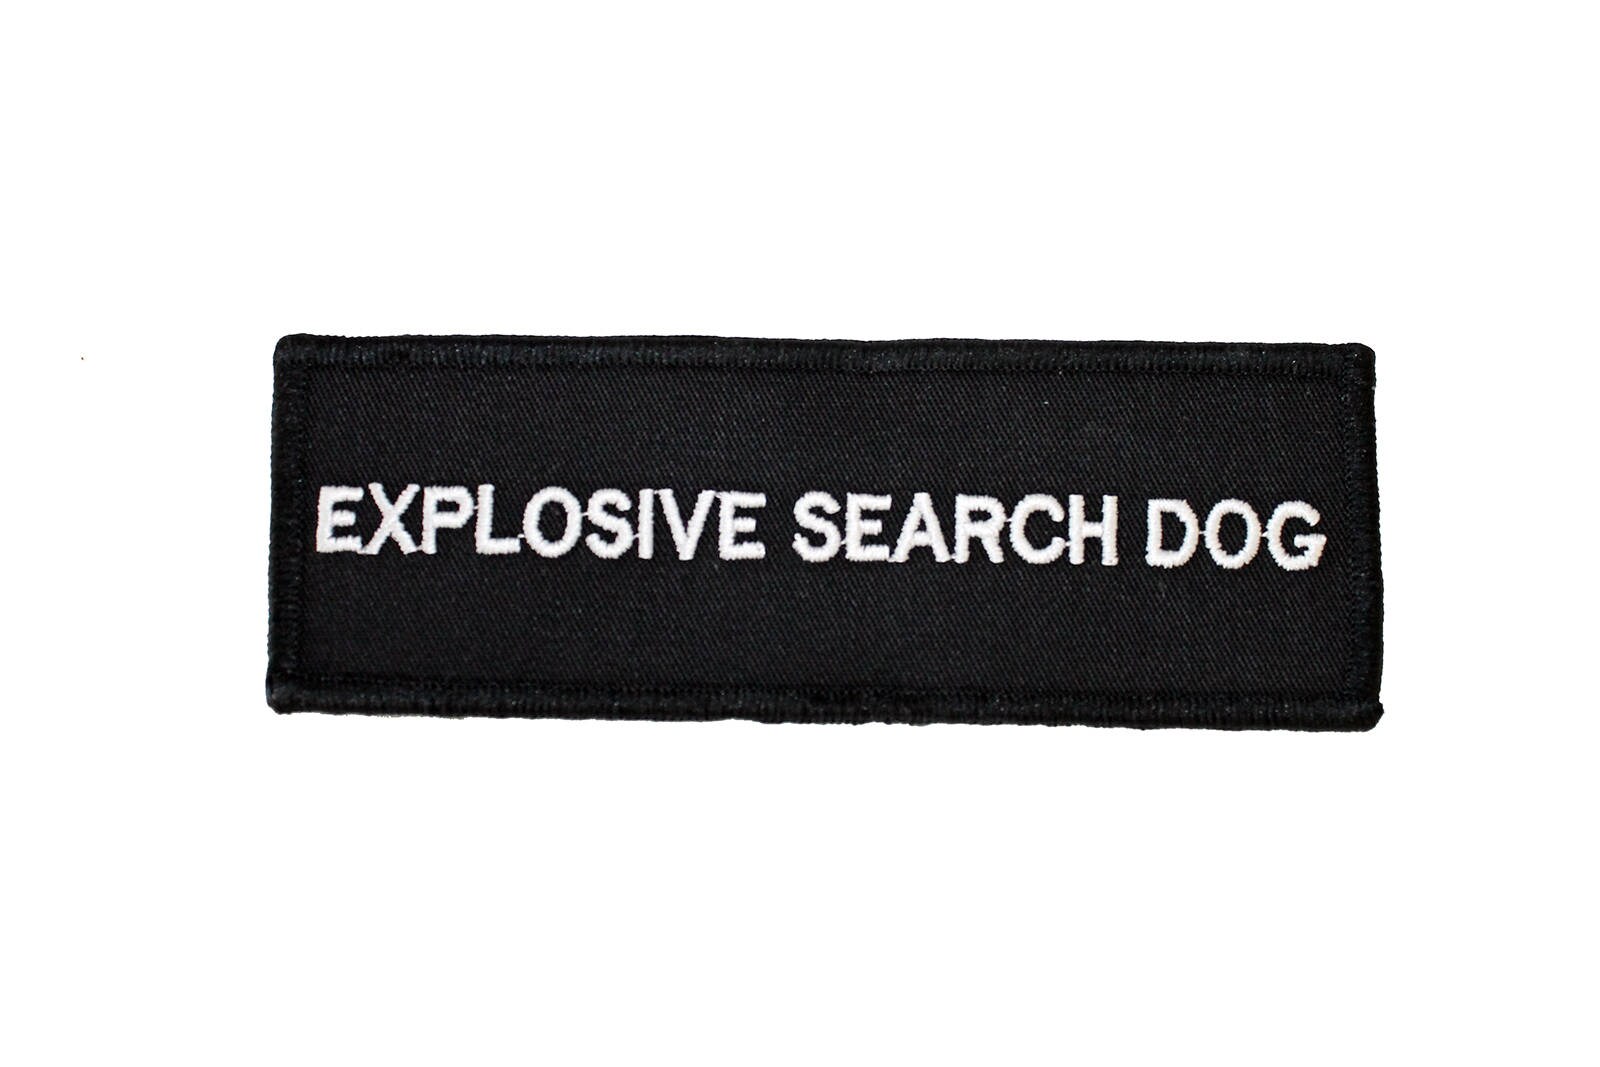 EXPLOSIVE SEARCH DOG Hook and Loop Backed Badge K9 Units Police Security -   Israel